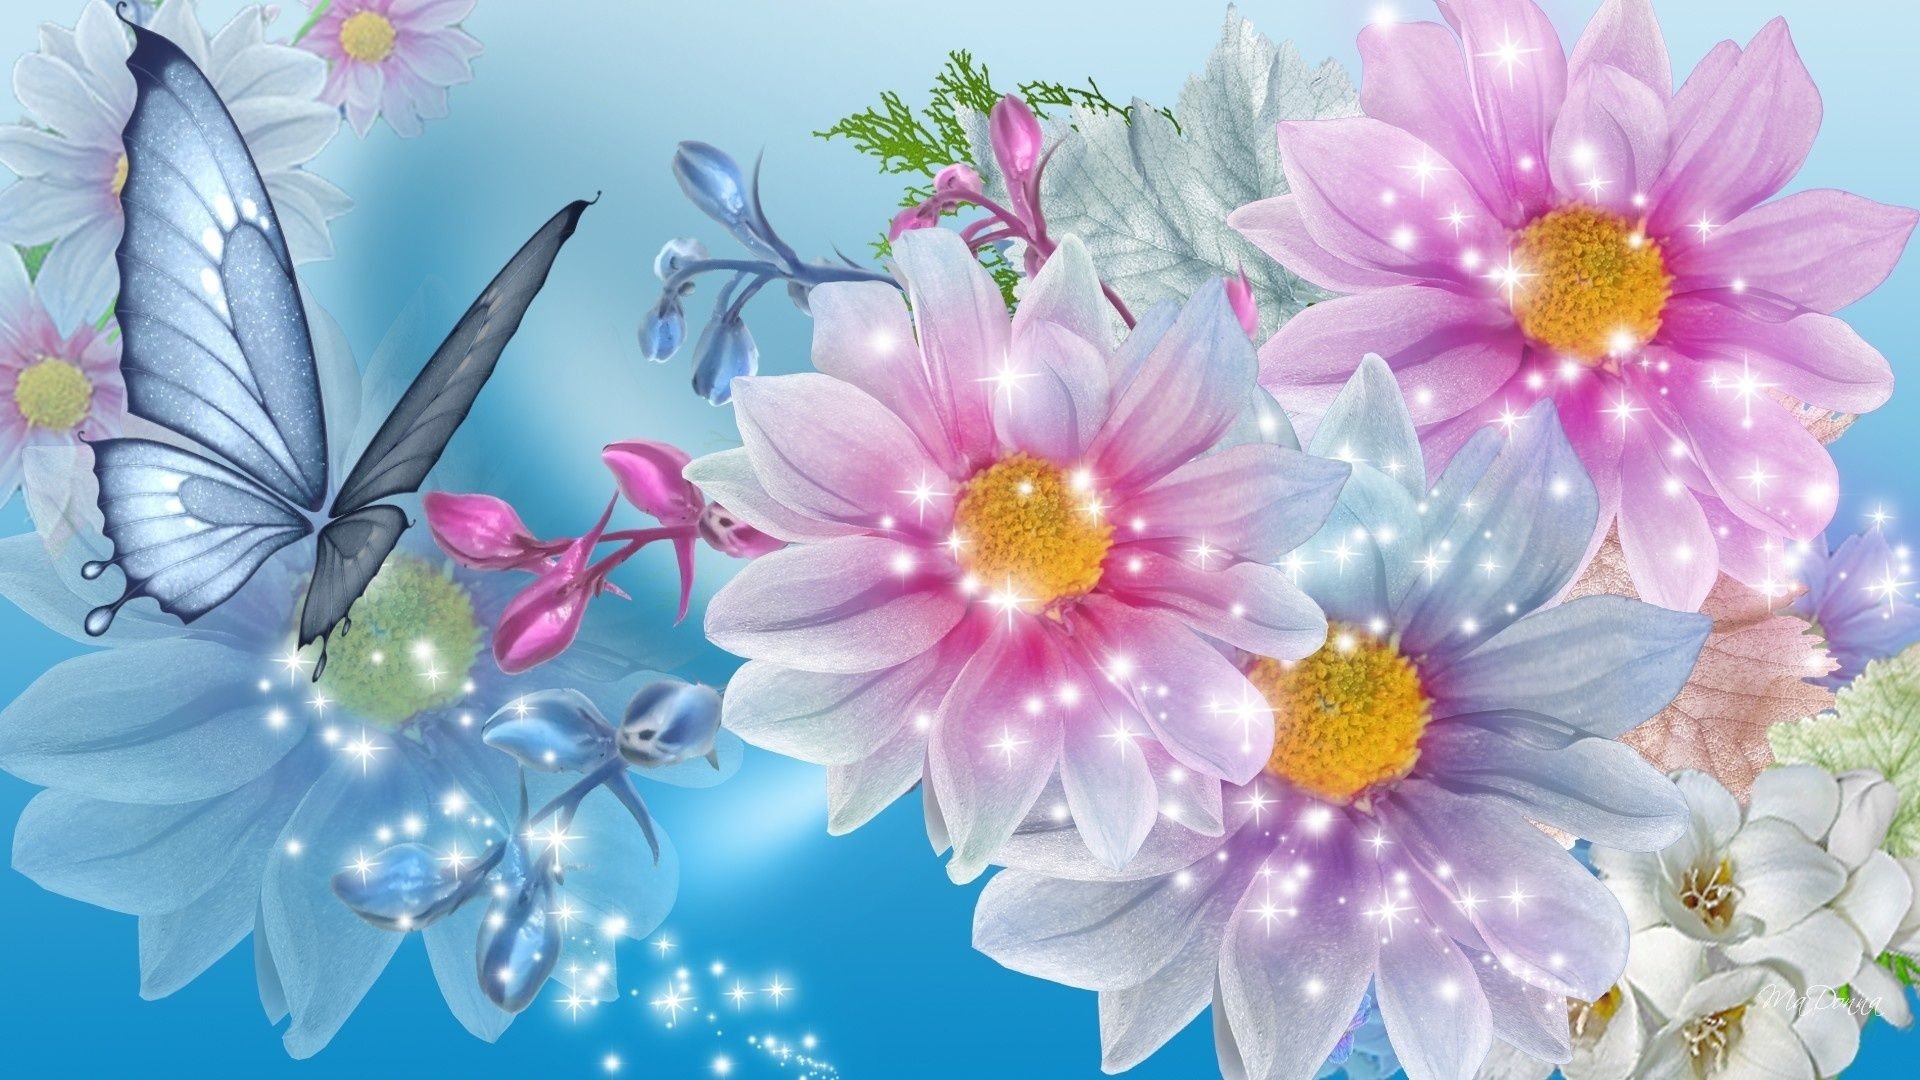 Pretty Flowers Pictures Desktop Wallpapers 68 images